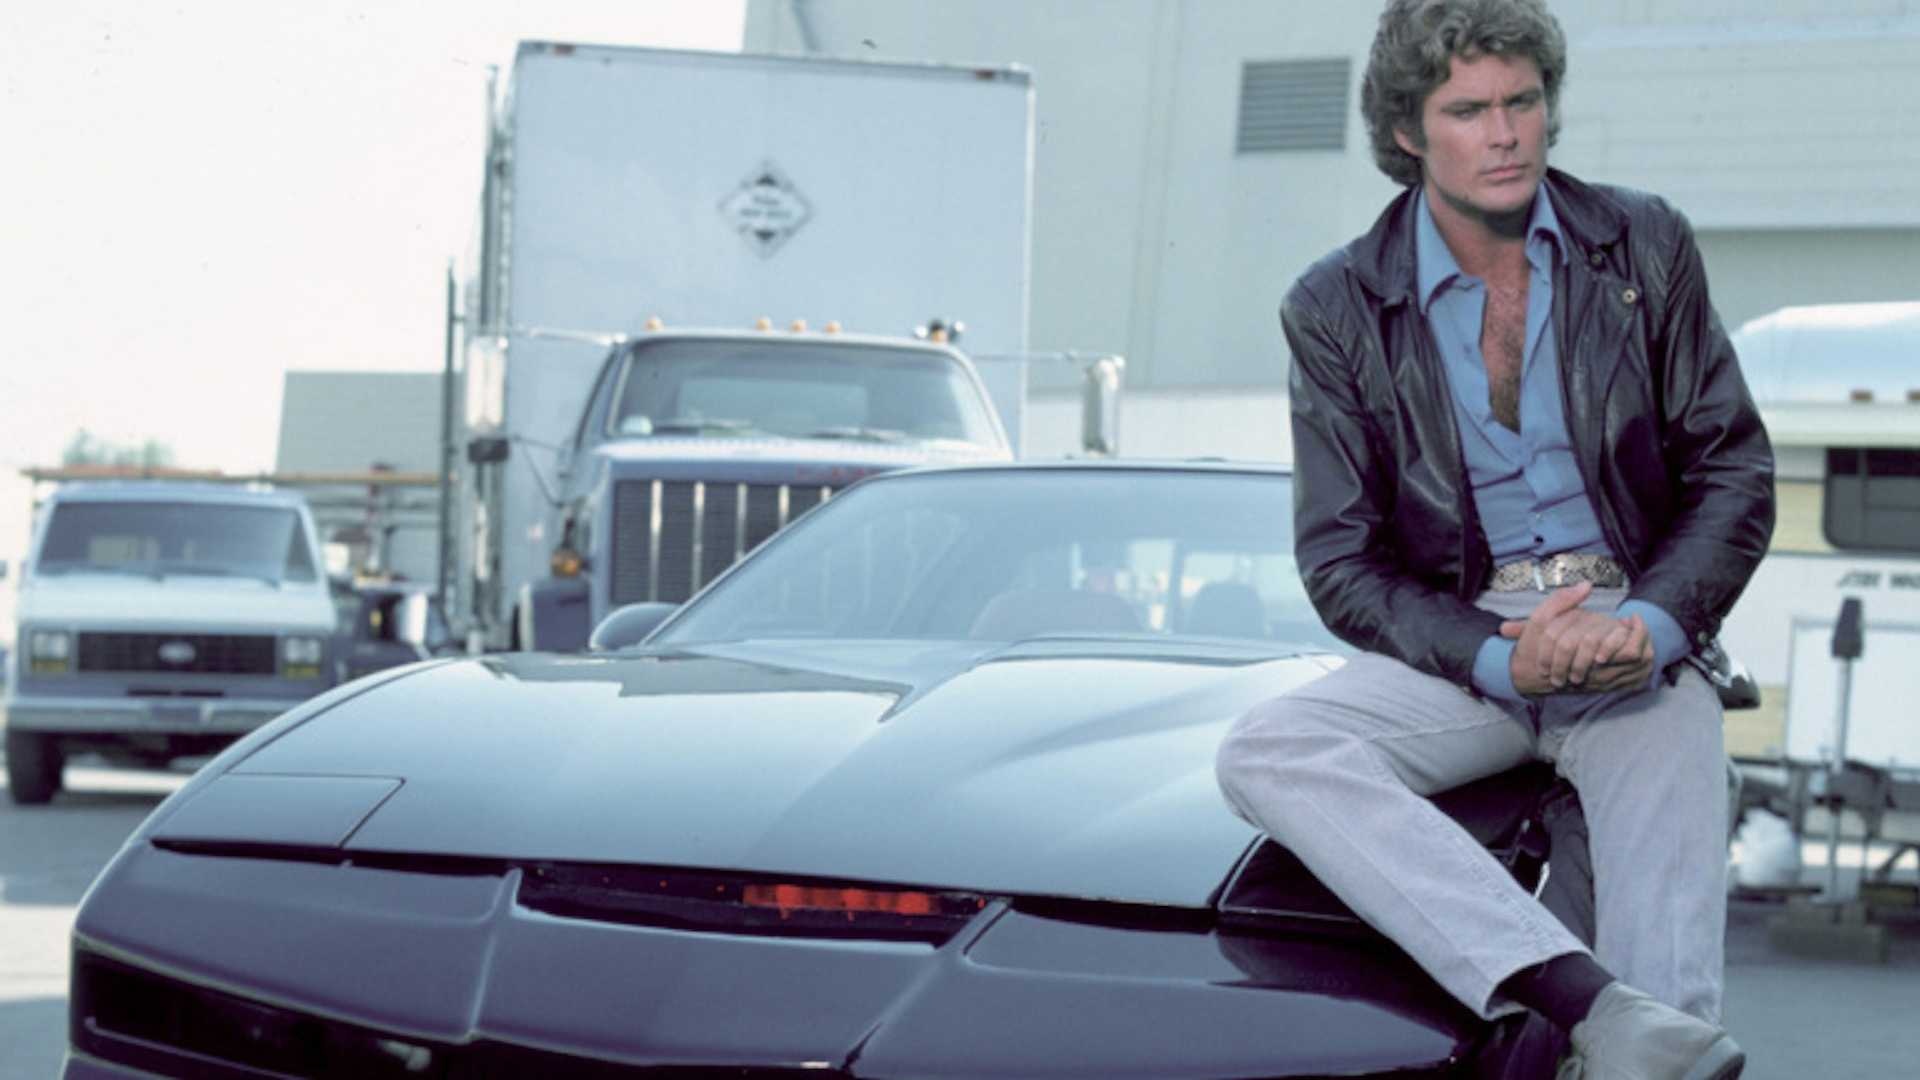 David Hasselhoff: Knight Rider, A sleek and modern crime fighter assisted by KITT, Michael Knight. 1920x1080 Full HD Background.